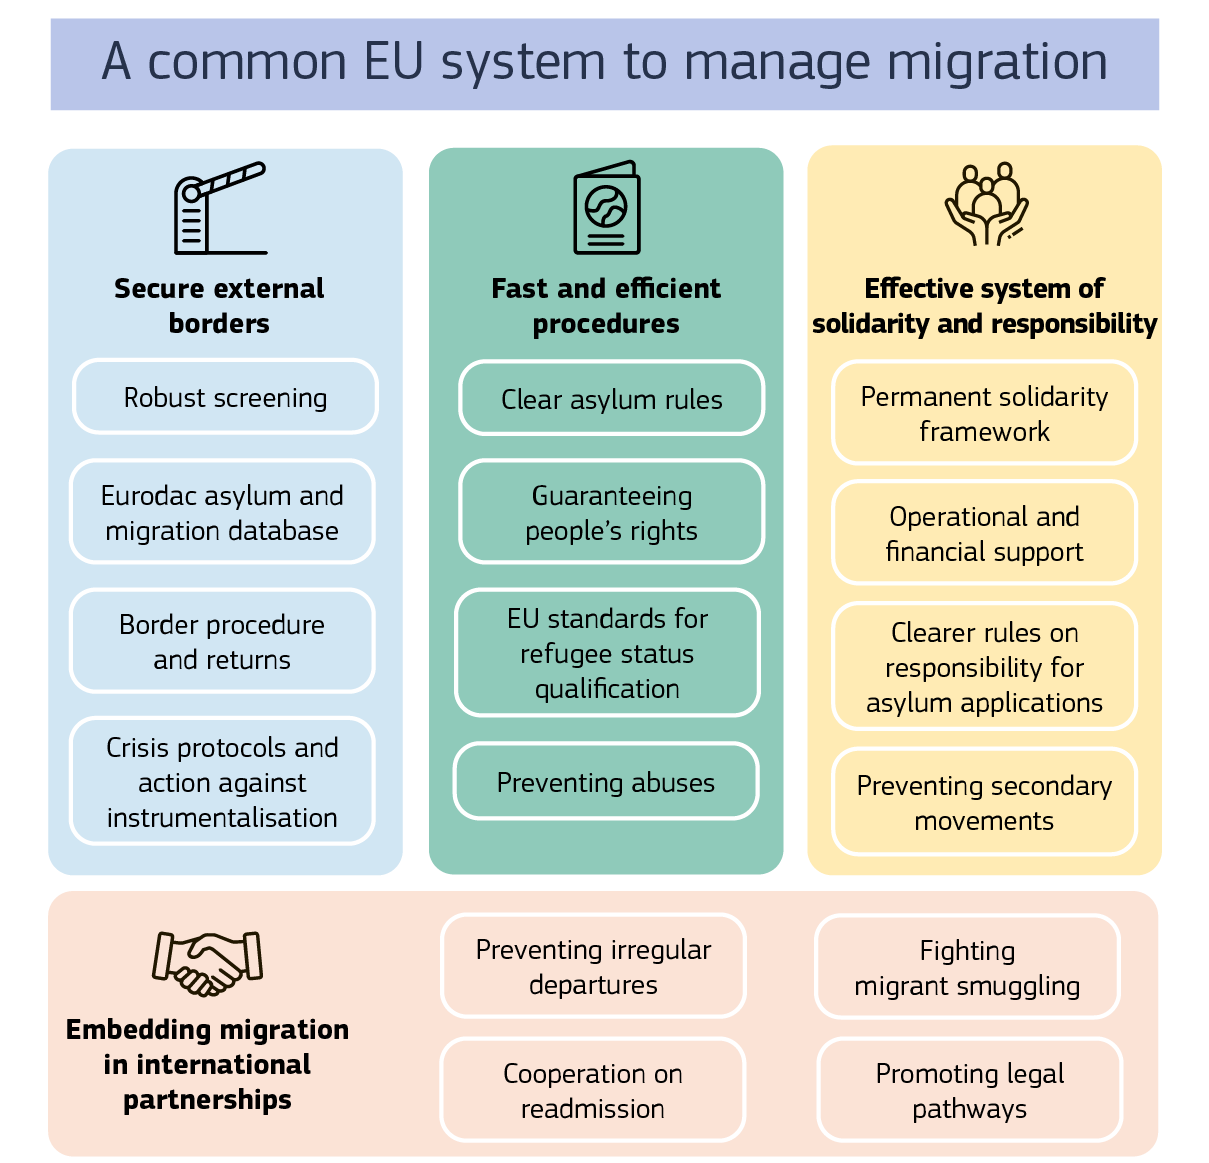 Four different policy areas group the main components of the rules introduced by the Pact: Secure external borders, Fast and efficient procedures, Effective system of solidarity and responsibility, Embedding migration in international partnerships.